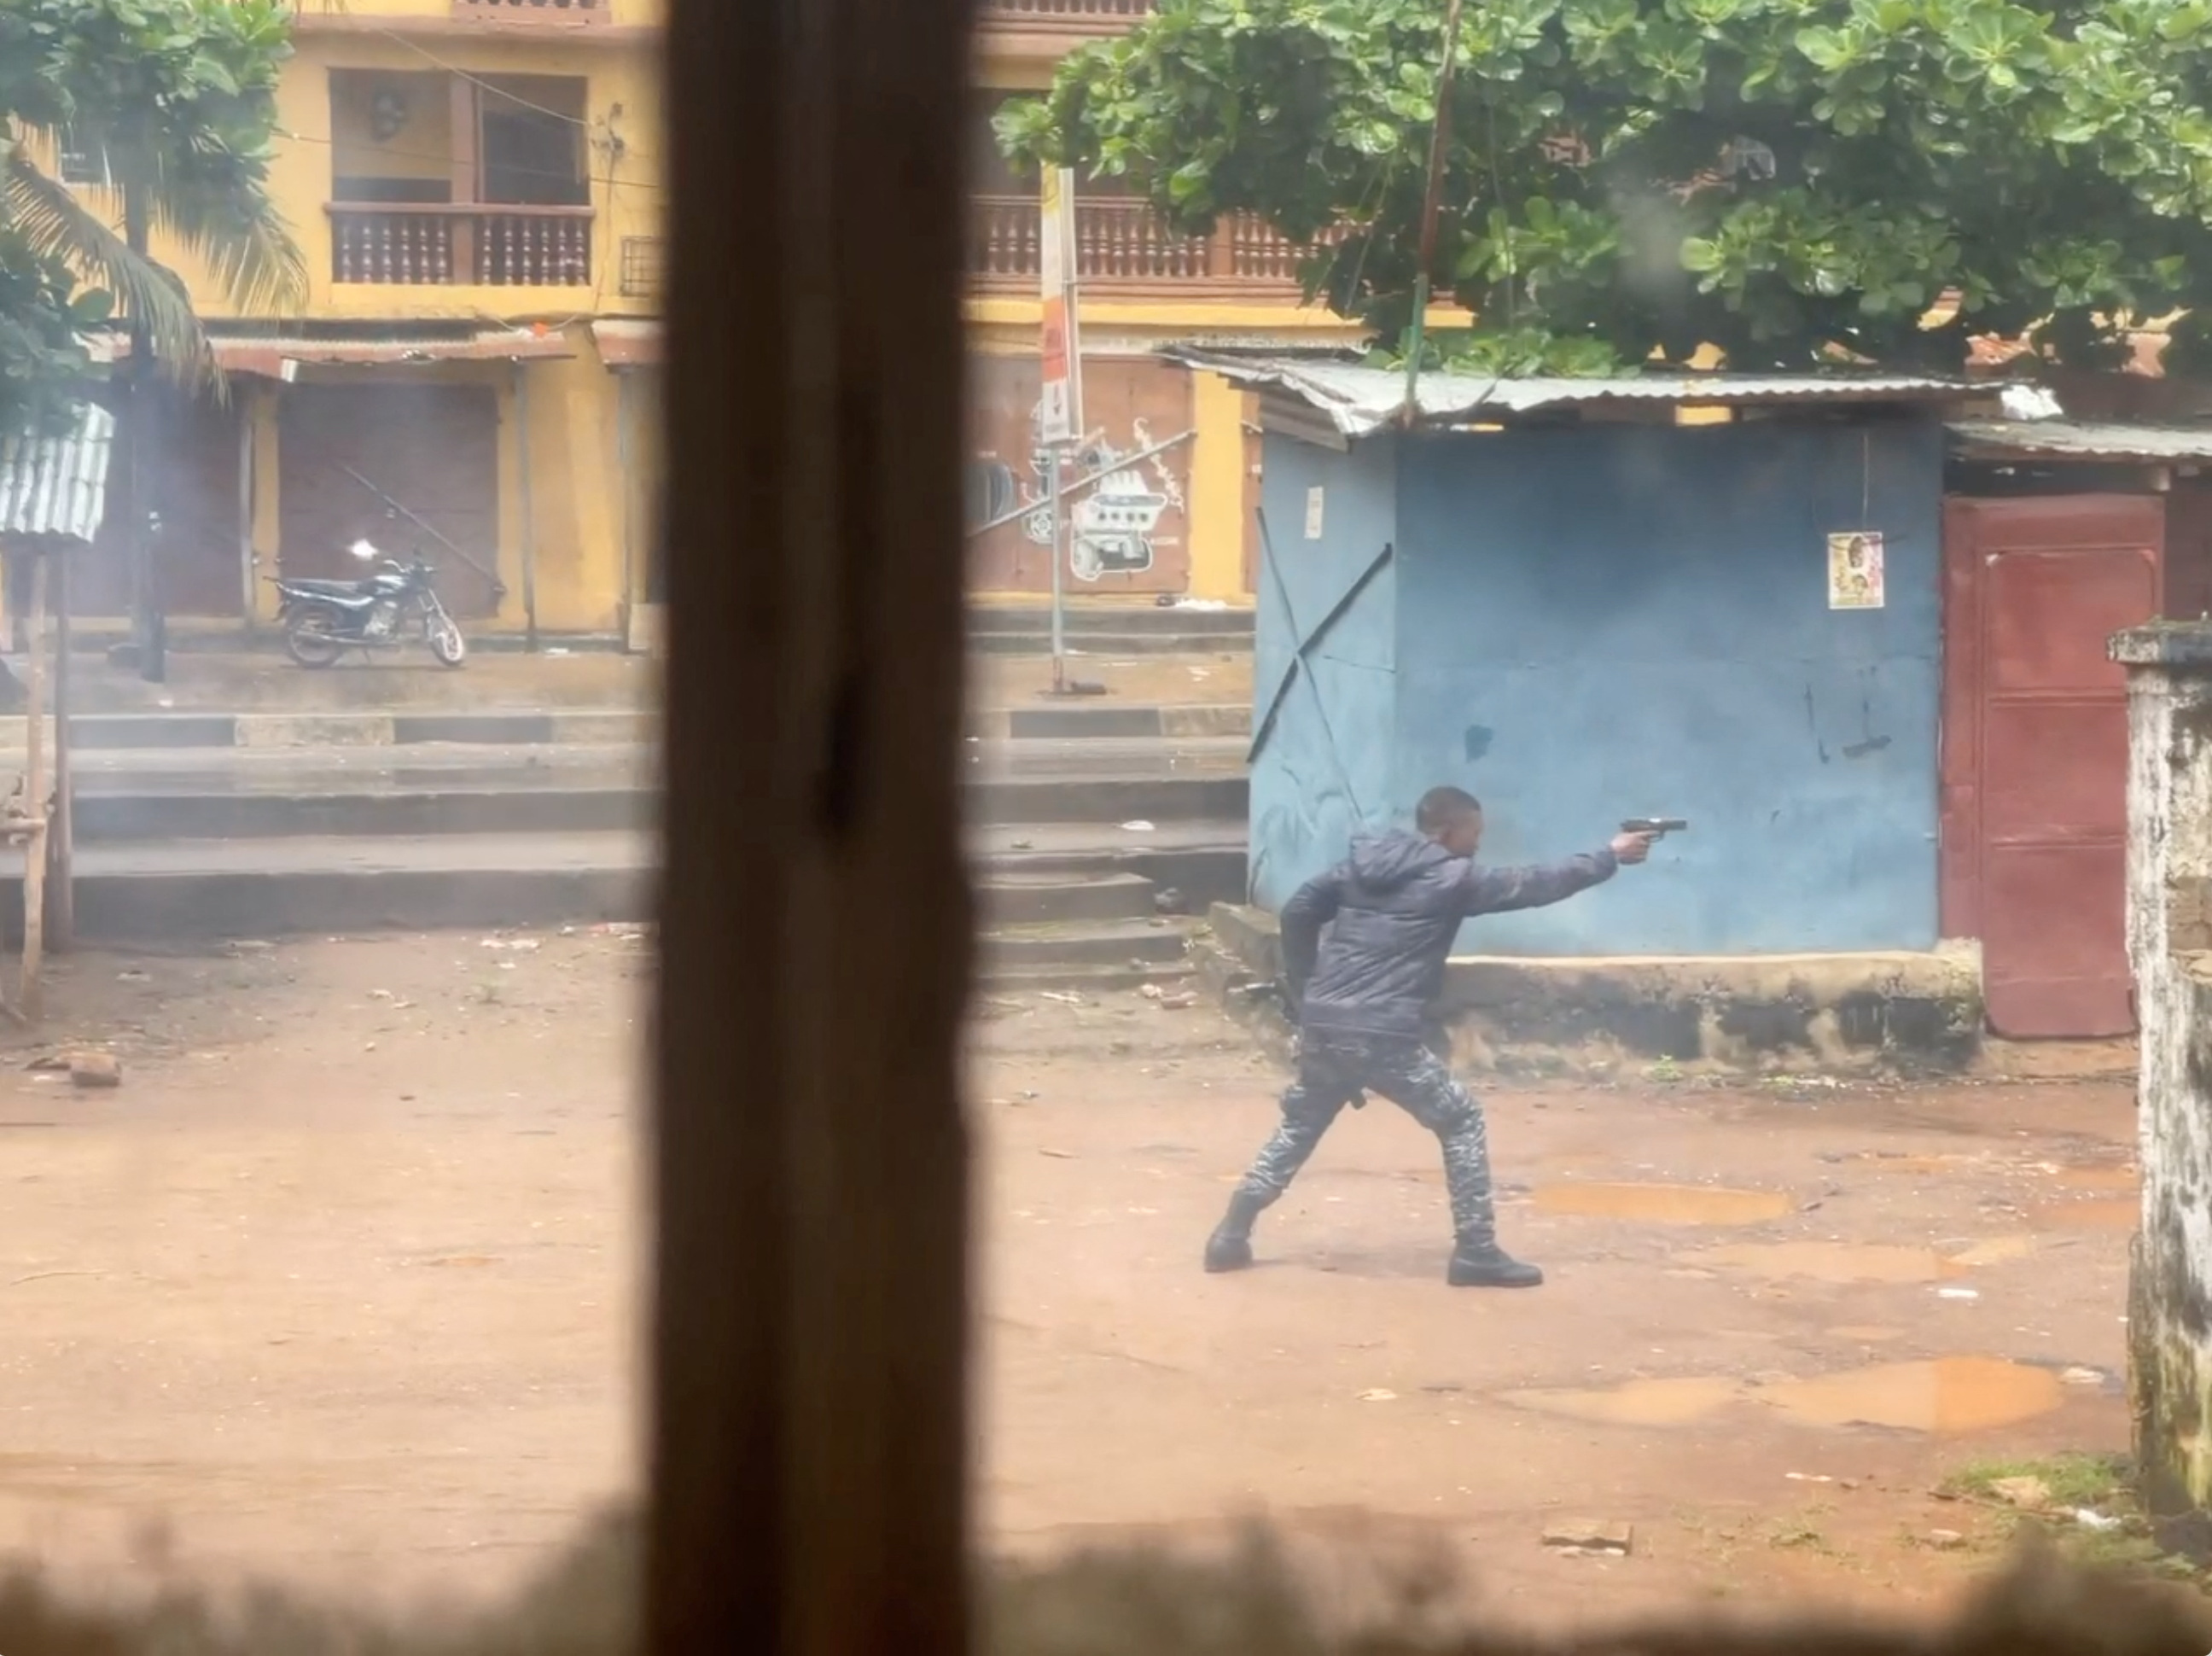 Sierra Leone imposes nationwide curfew amid deadly anti-government protests